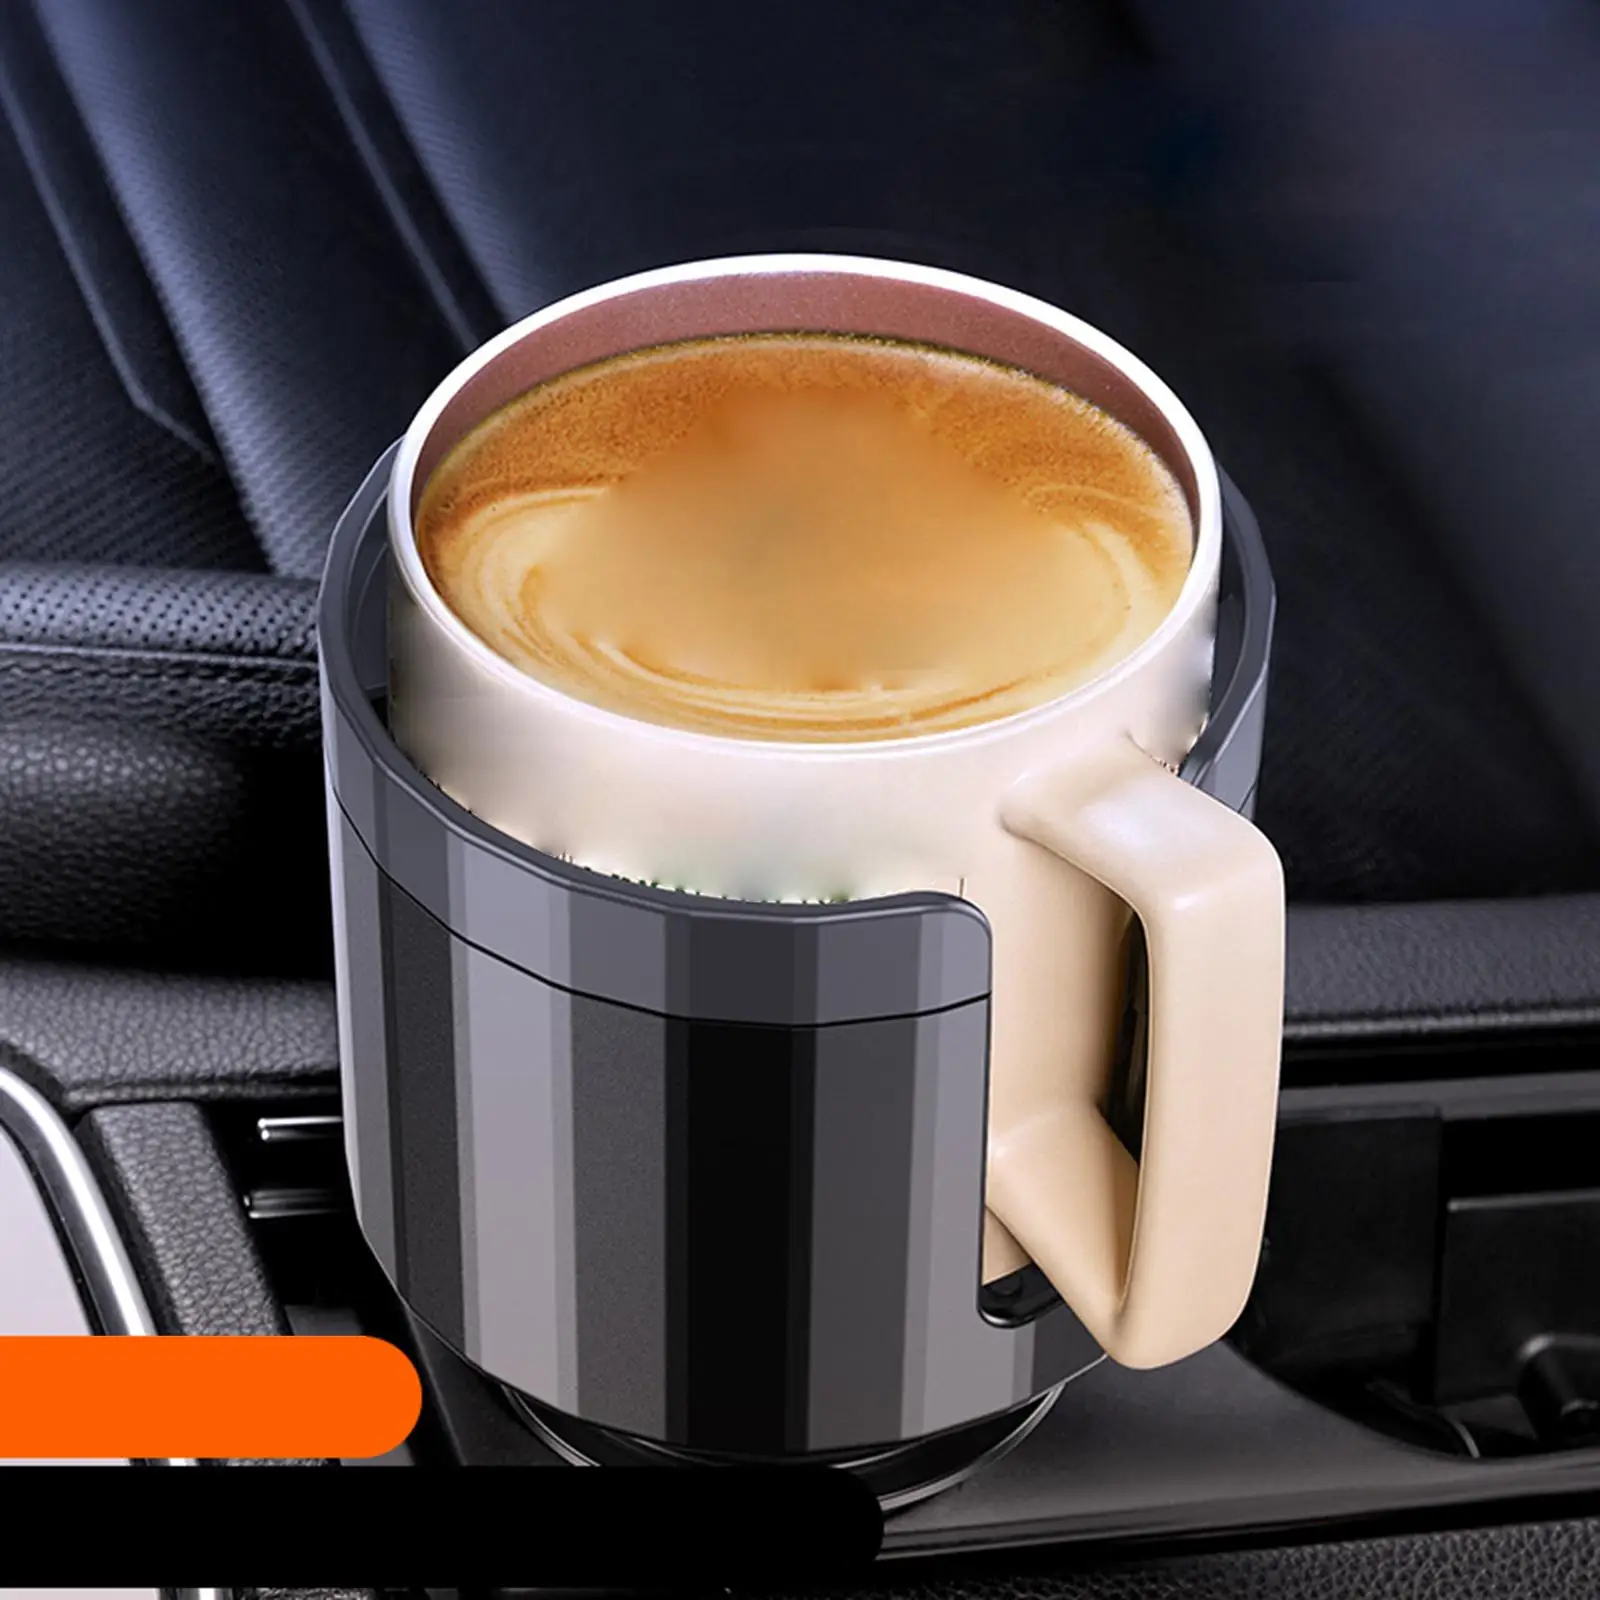 Car Cup Holder Expander Adapter Organizer Water Cup Holder Fit for Cups Premium